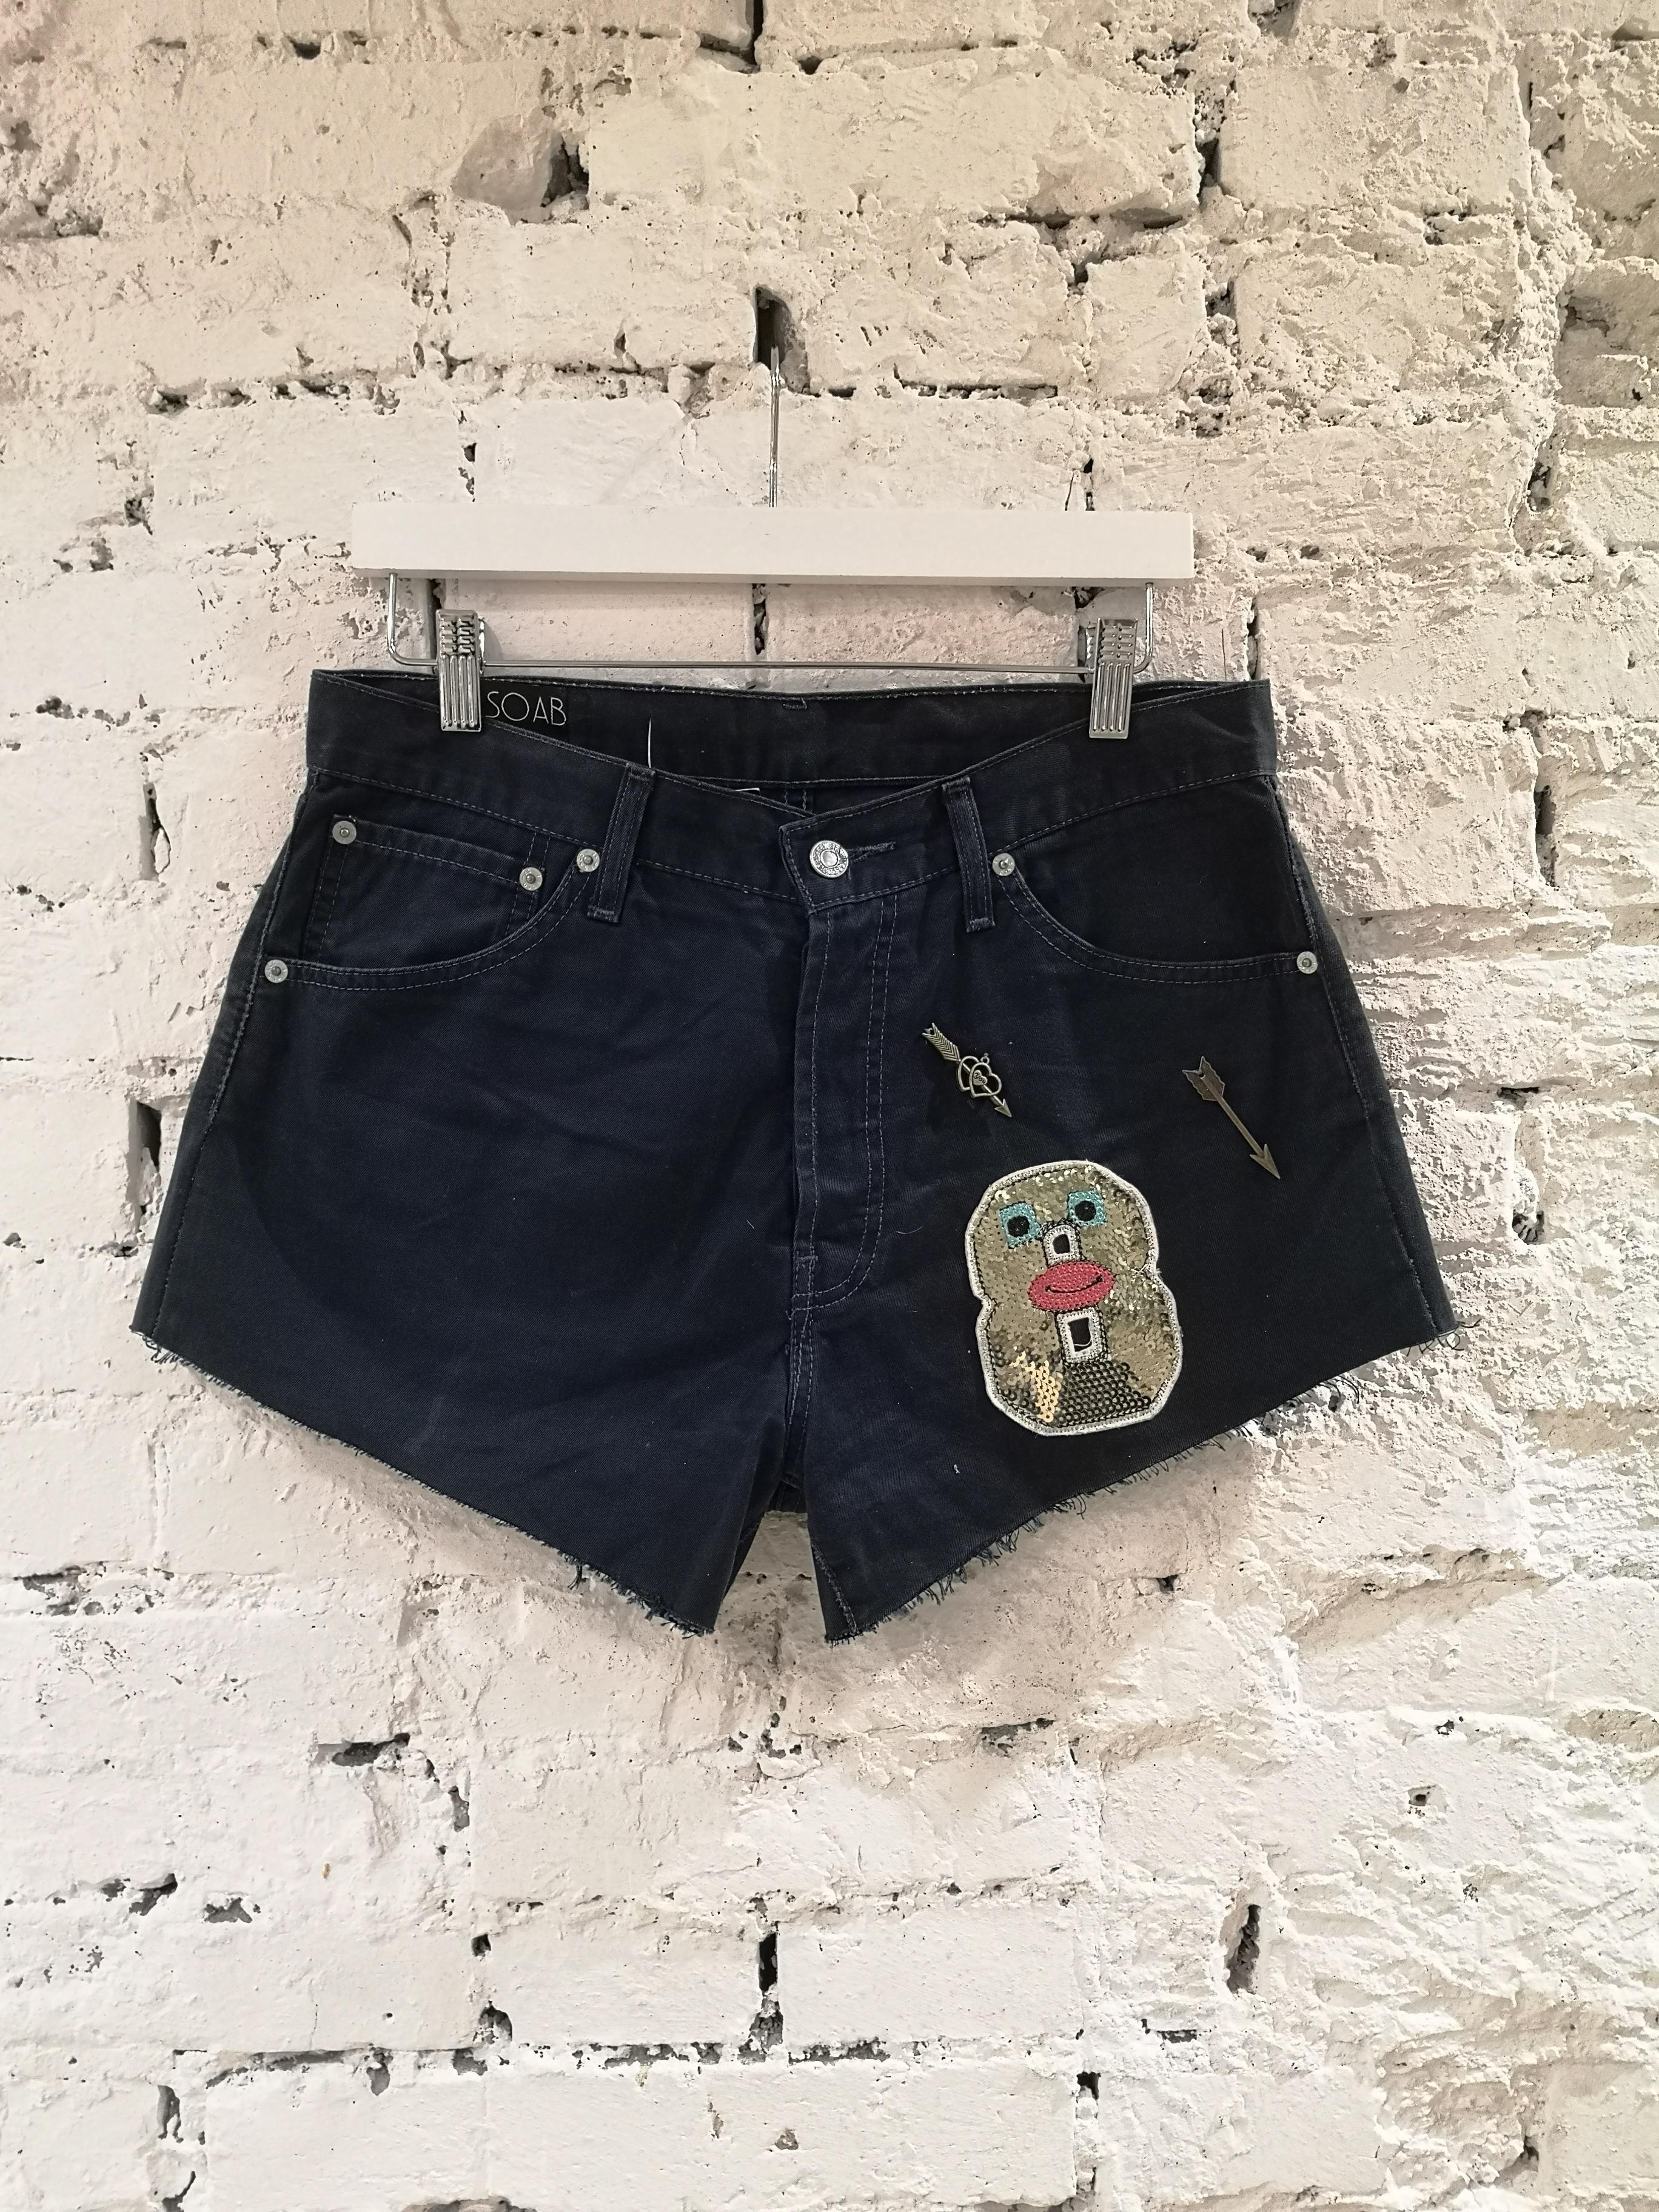 Blue denim SOAB shorts
vintage shorts recycled and customised totally handmade embellished with sequins and patterns all over
composition: cotton
total lenght 34 cm waist 8cm